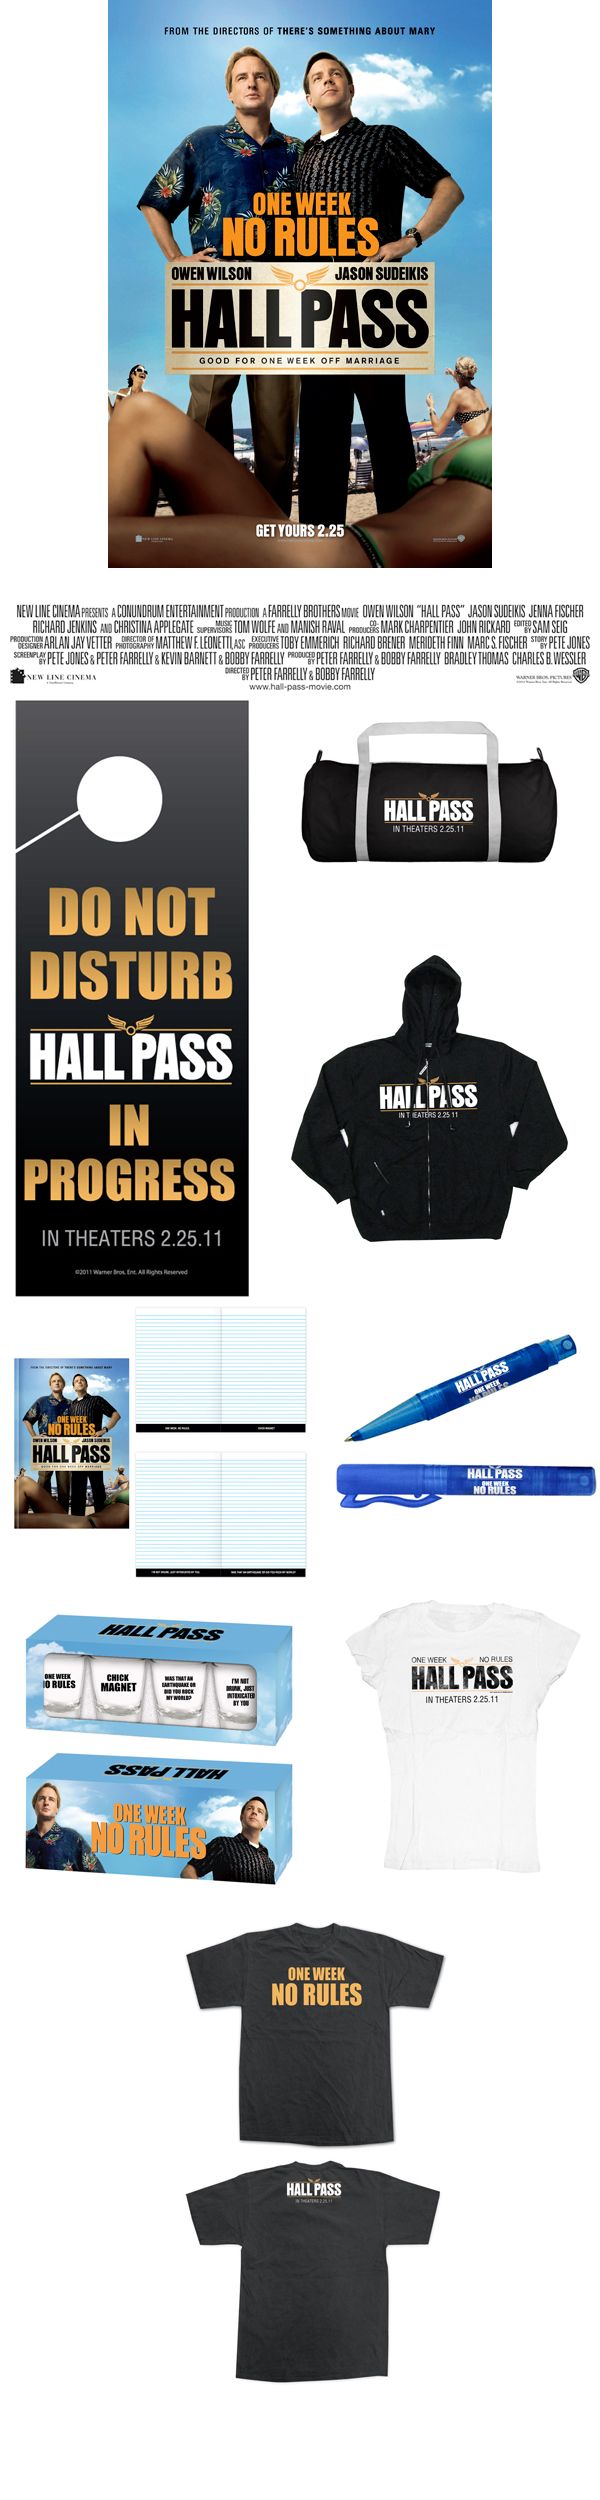 Hall Pass giveaway